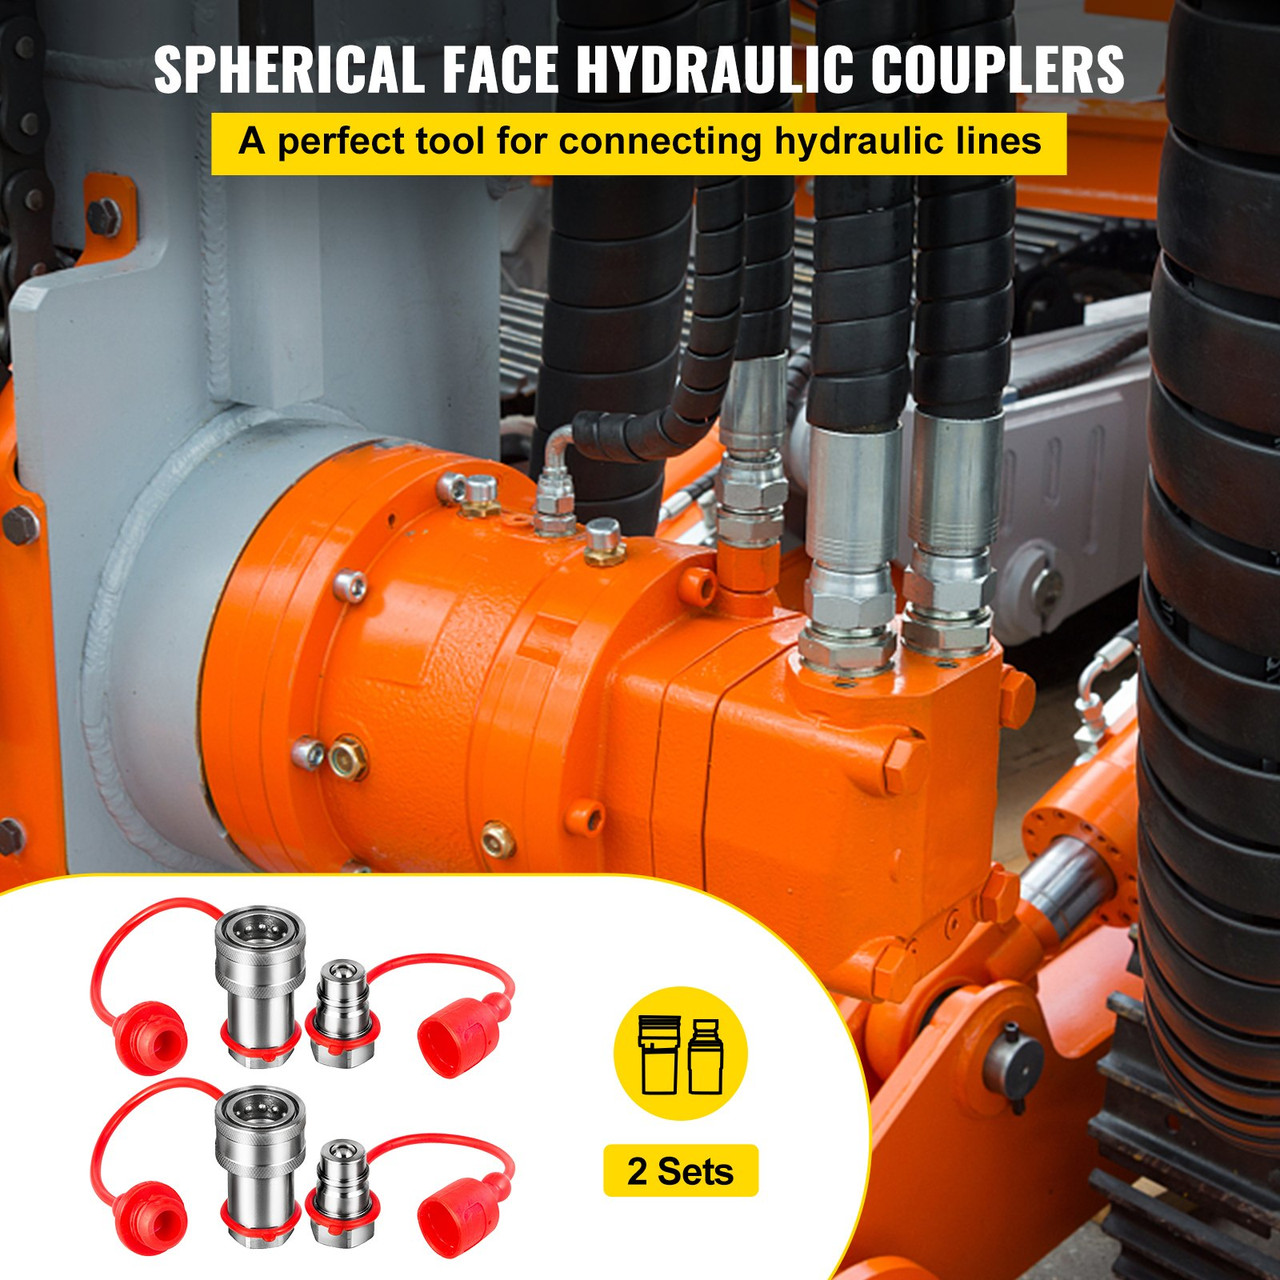 Spherical Face Hydraulic Couplers 1/4" Body 1/4" NPT Thread, Skid Steer Quick Connect Couplings, 5076 PSI Hydraulic Fittings, 2 Sets Hydraulic